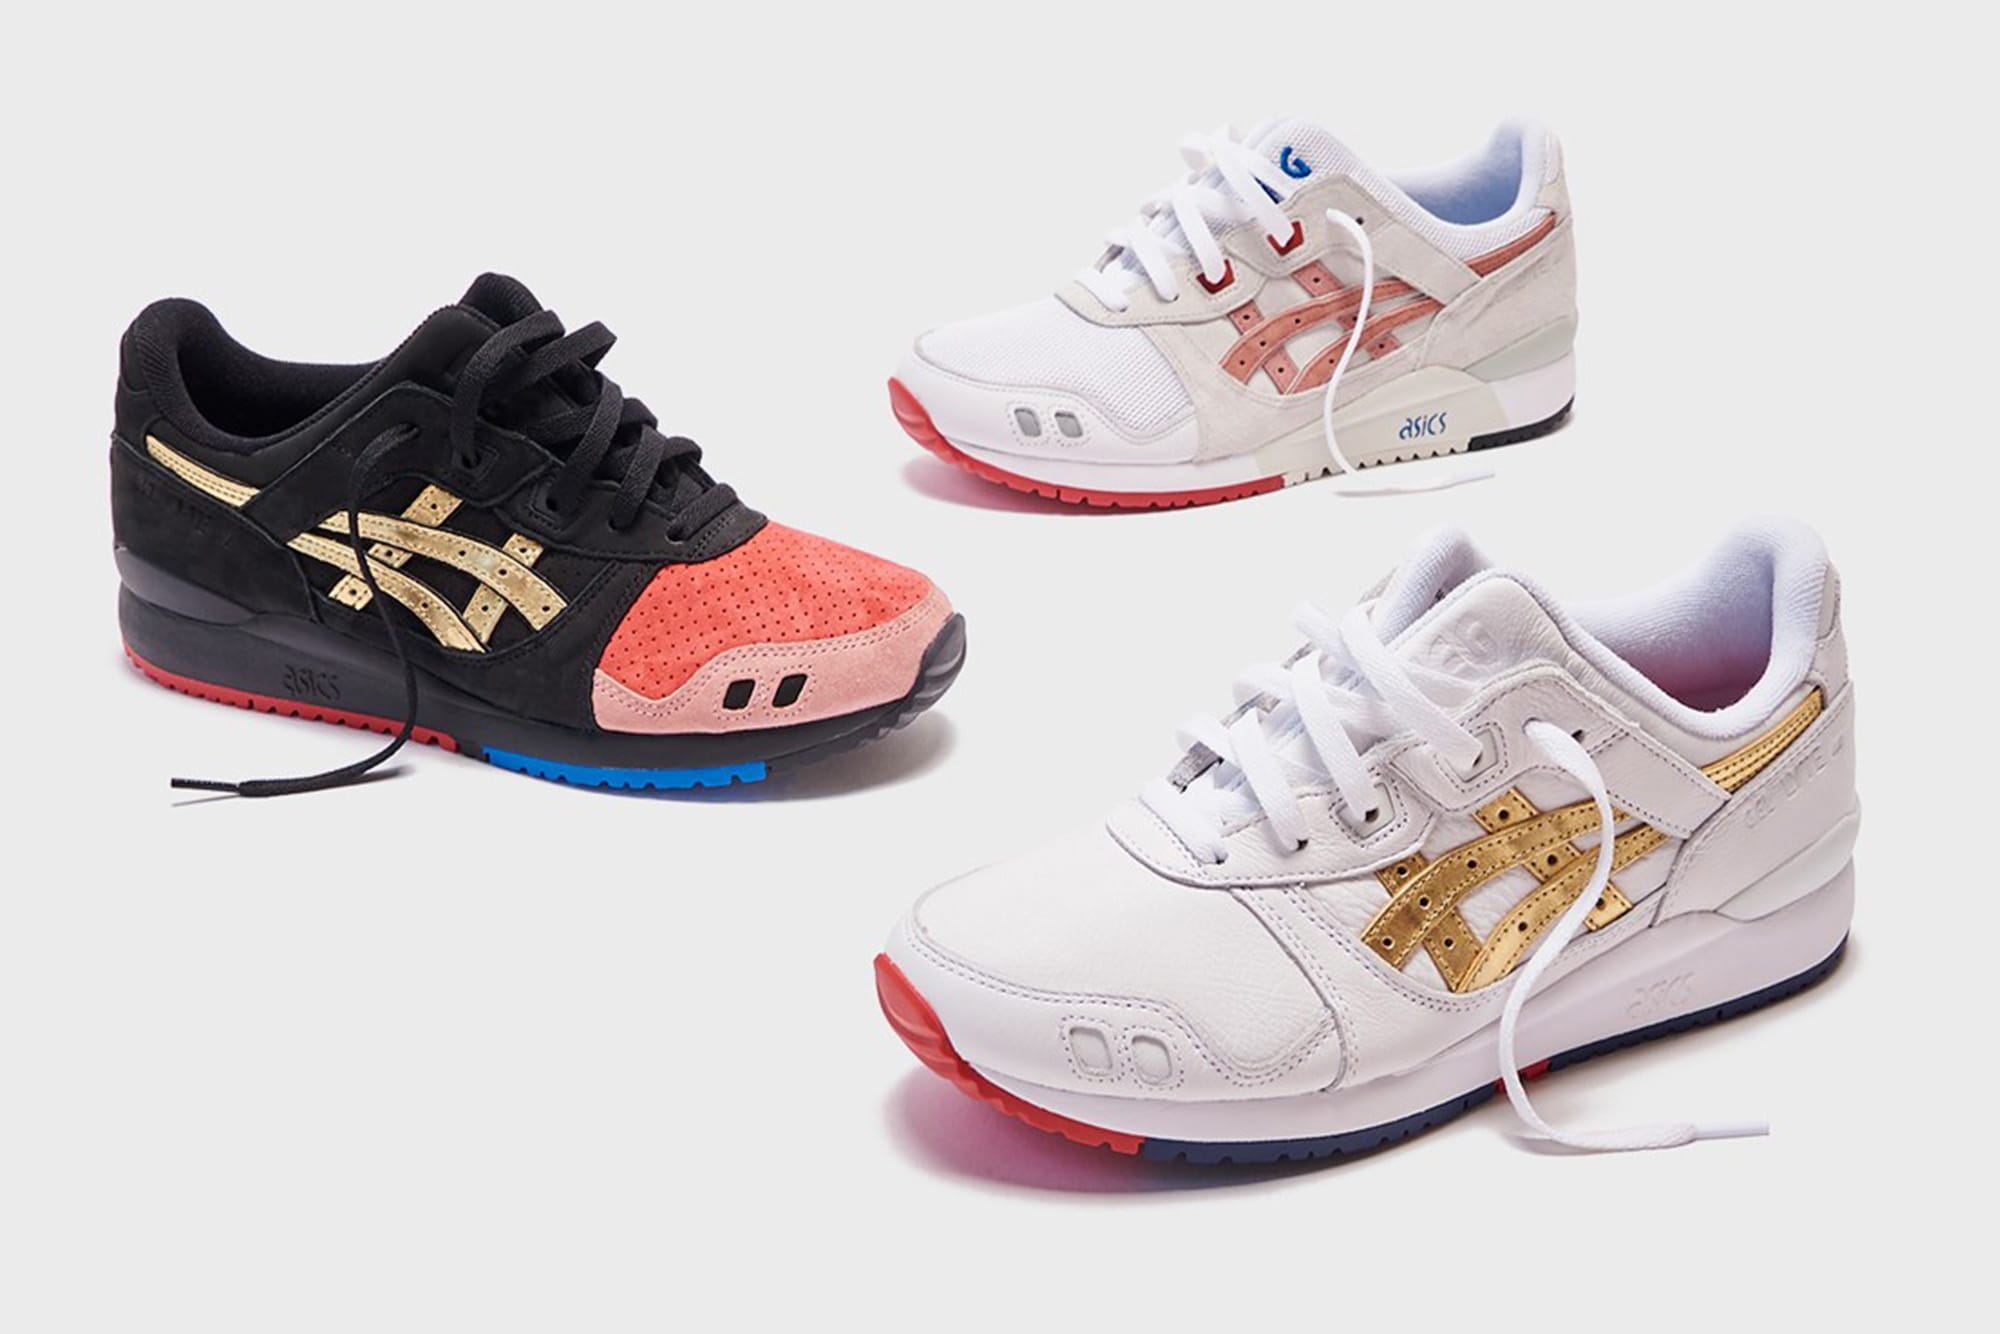 froot loop asics shoes